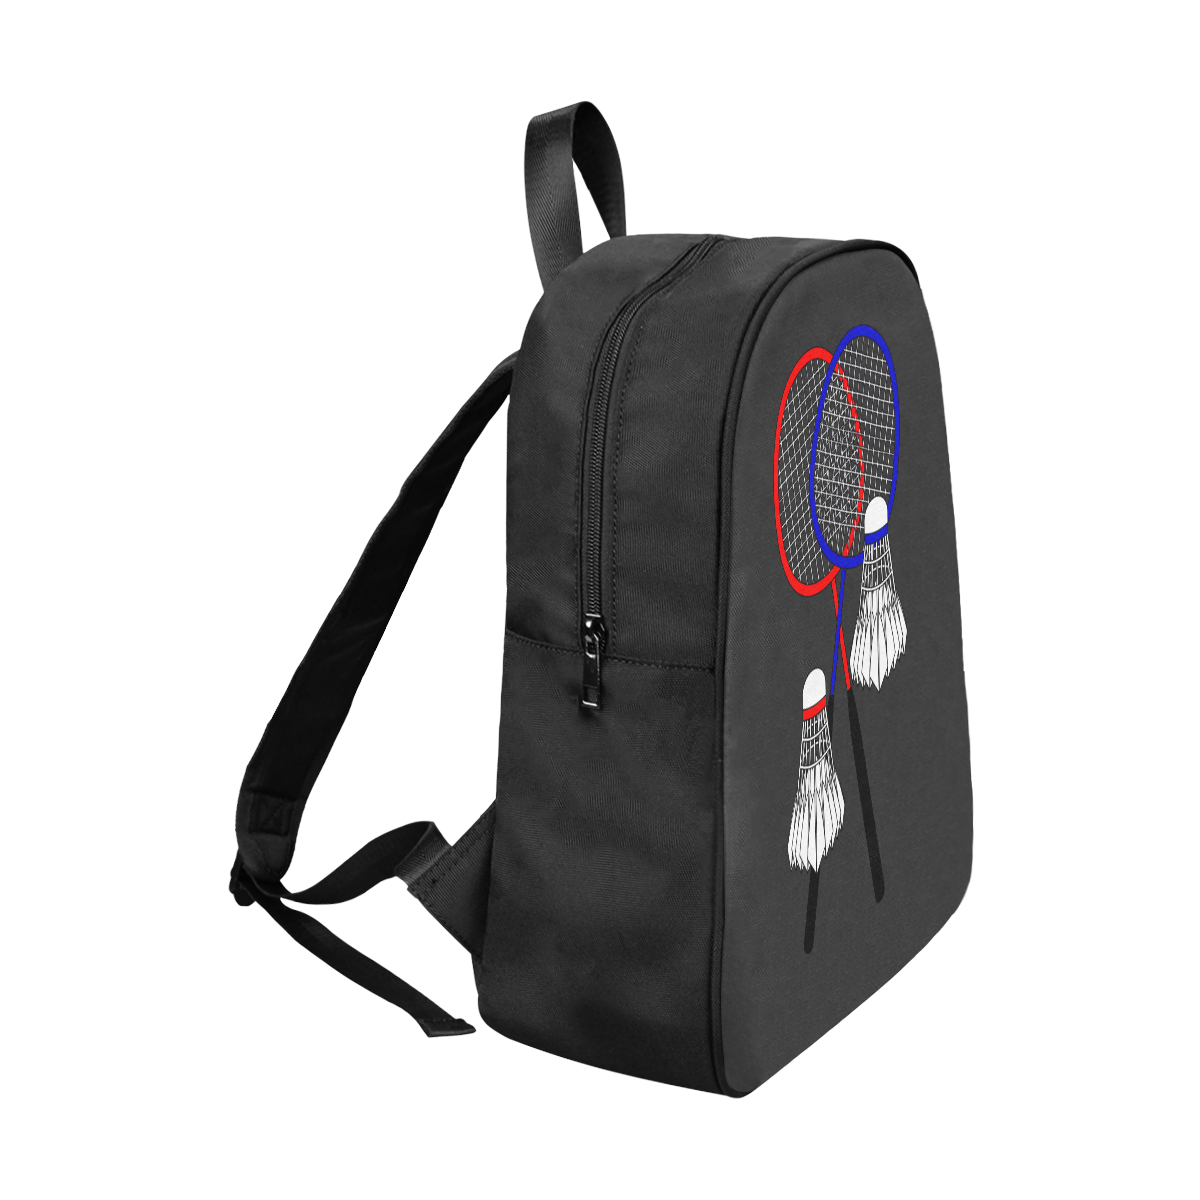 Badminton Rackets and Shuttlecocks Sports Charcoal Fabric School Backpack (Model 1682) (Large)